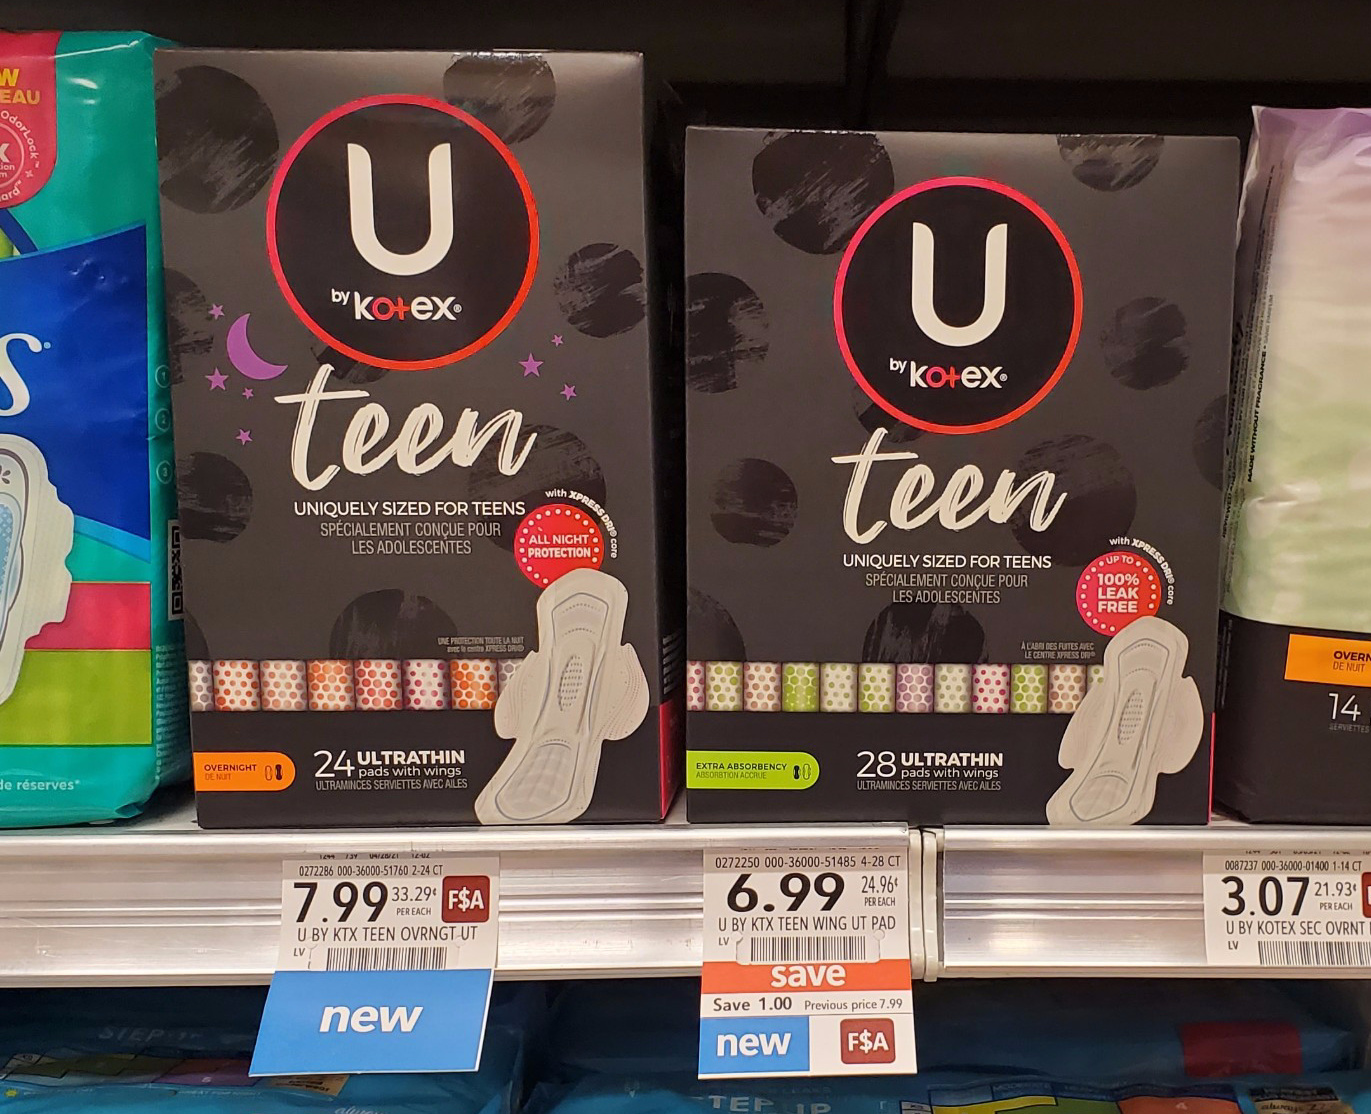 Huge Savings On New U by Kotex® Teen Pads Available This Week At Publix on I Heart Publix